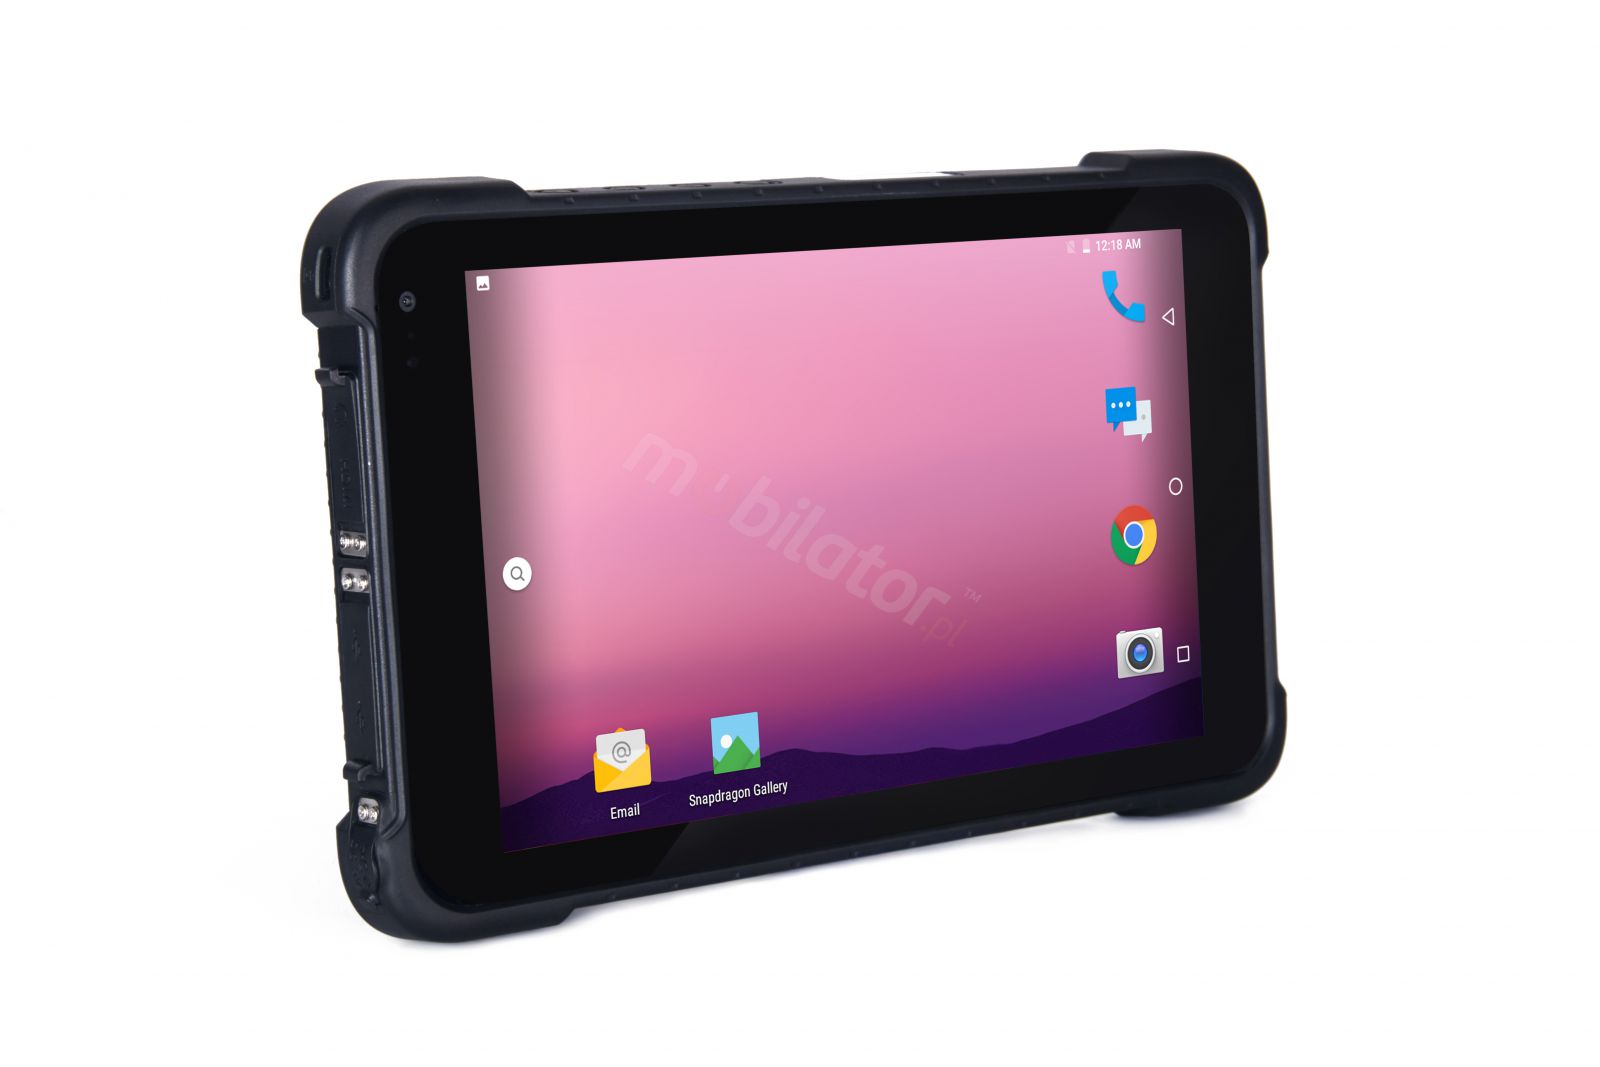 Emdoor Q86 v.6 - rugged industrial tablet, IP67 and 1D MOTO code reader, efficient battery and MSM processor, 800 nits screen and 4GB RAM 